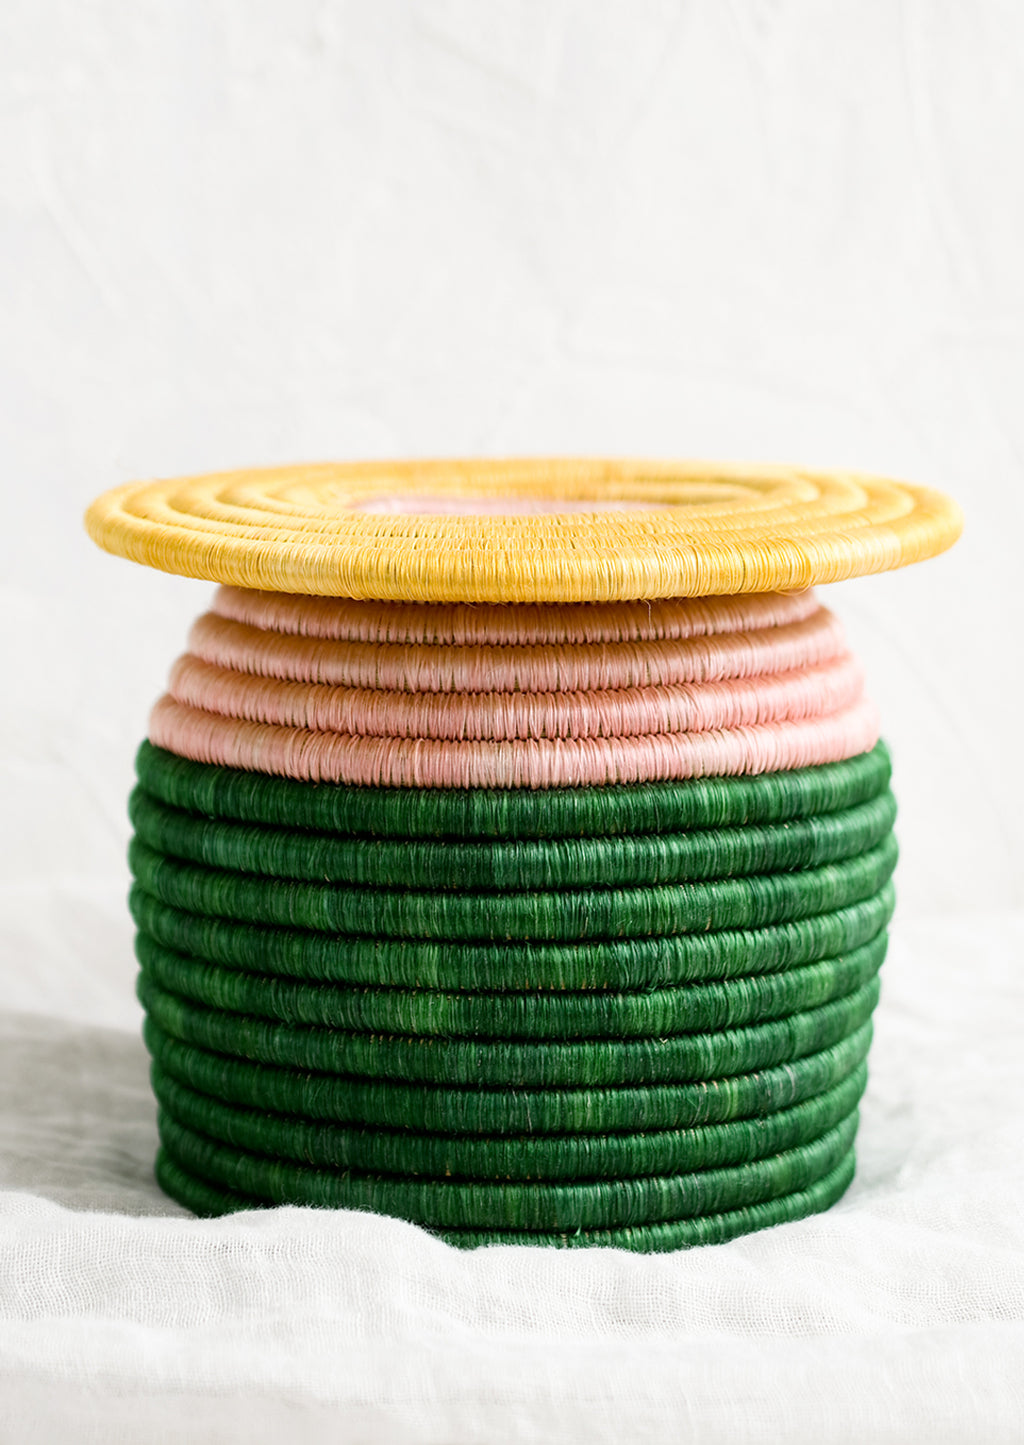 2: A color blocked, woven sweetgrass vase with flat top in yellow, pink and green.